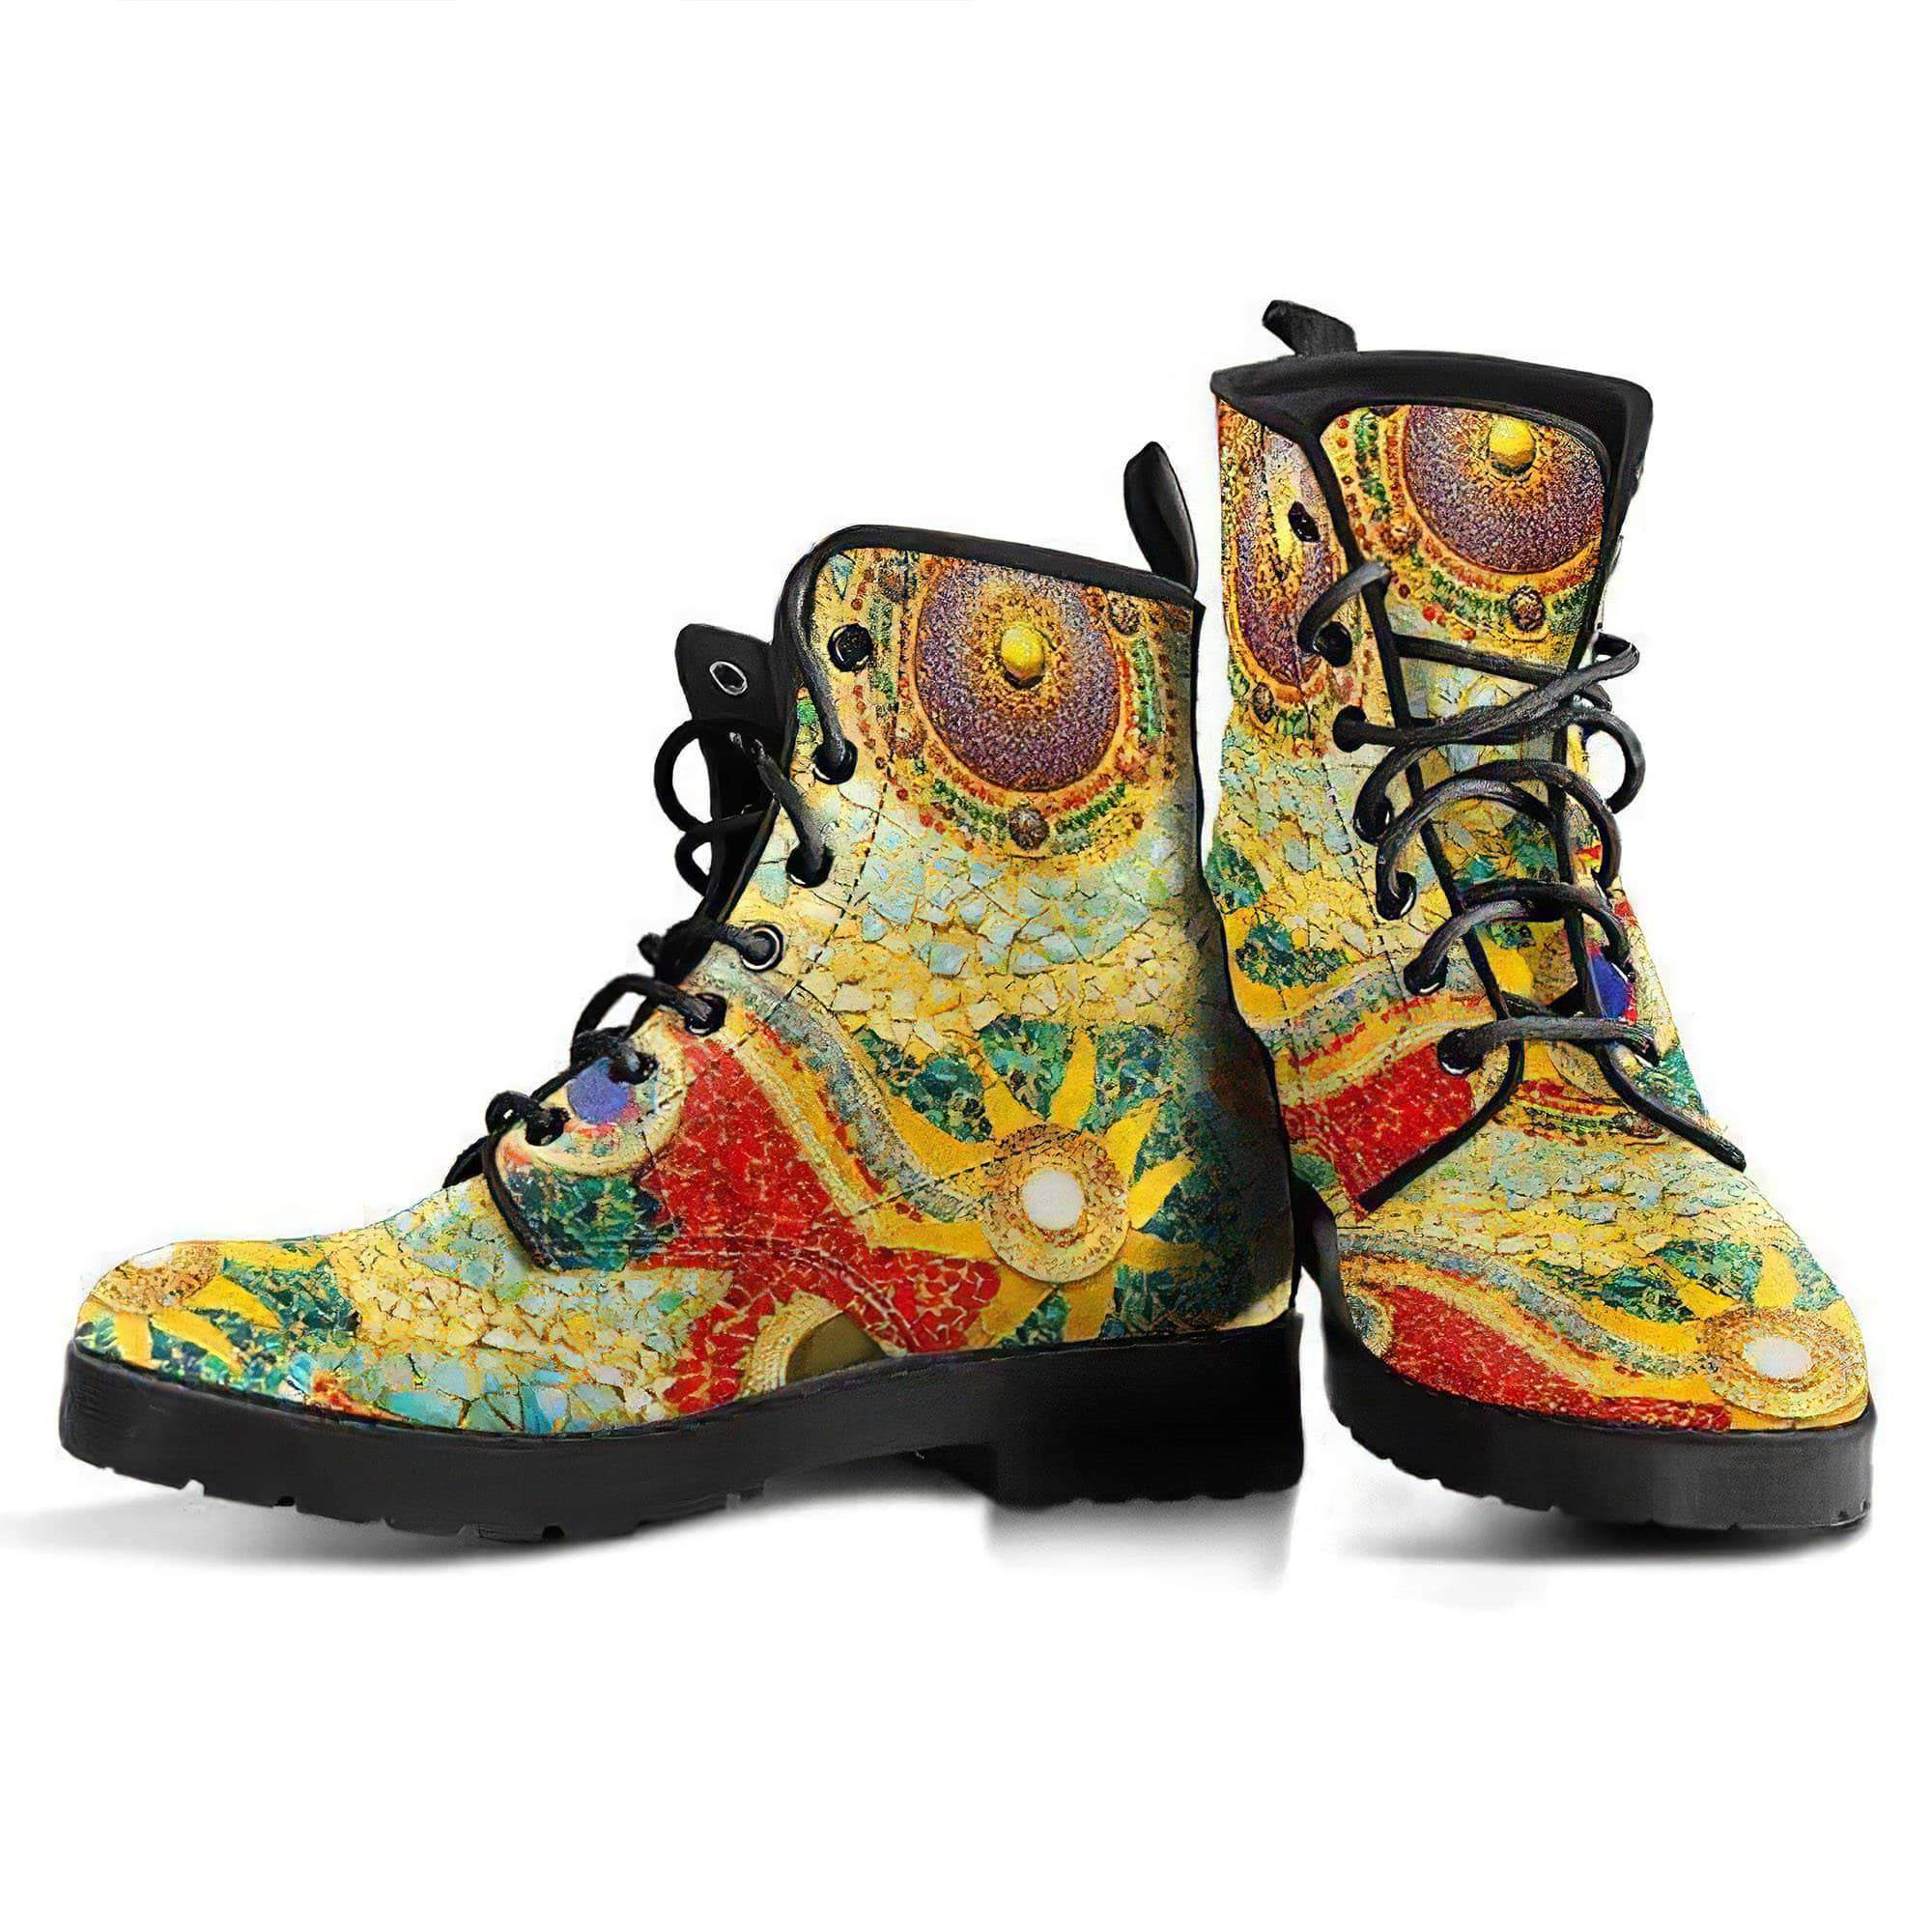 mosaic-2-handcrafted-boots-women-s-leather-boots-12051912392765.jpg